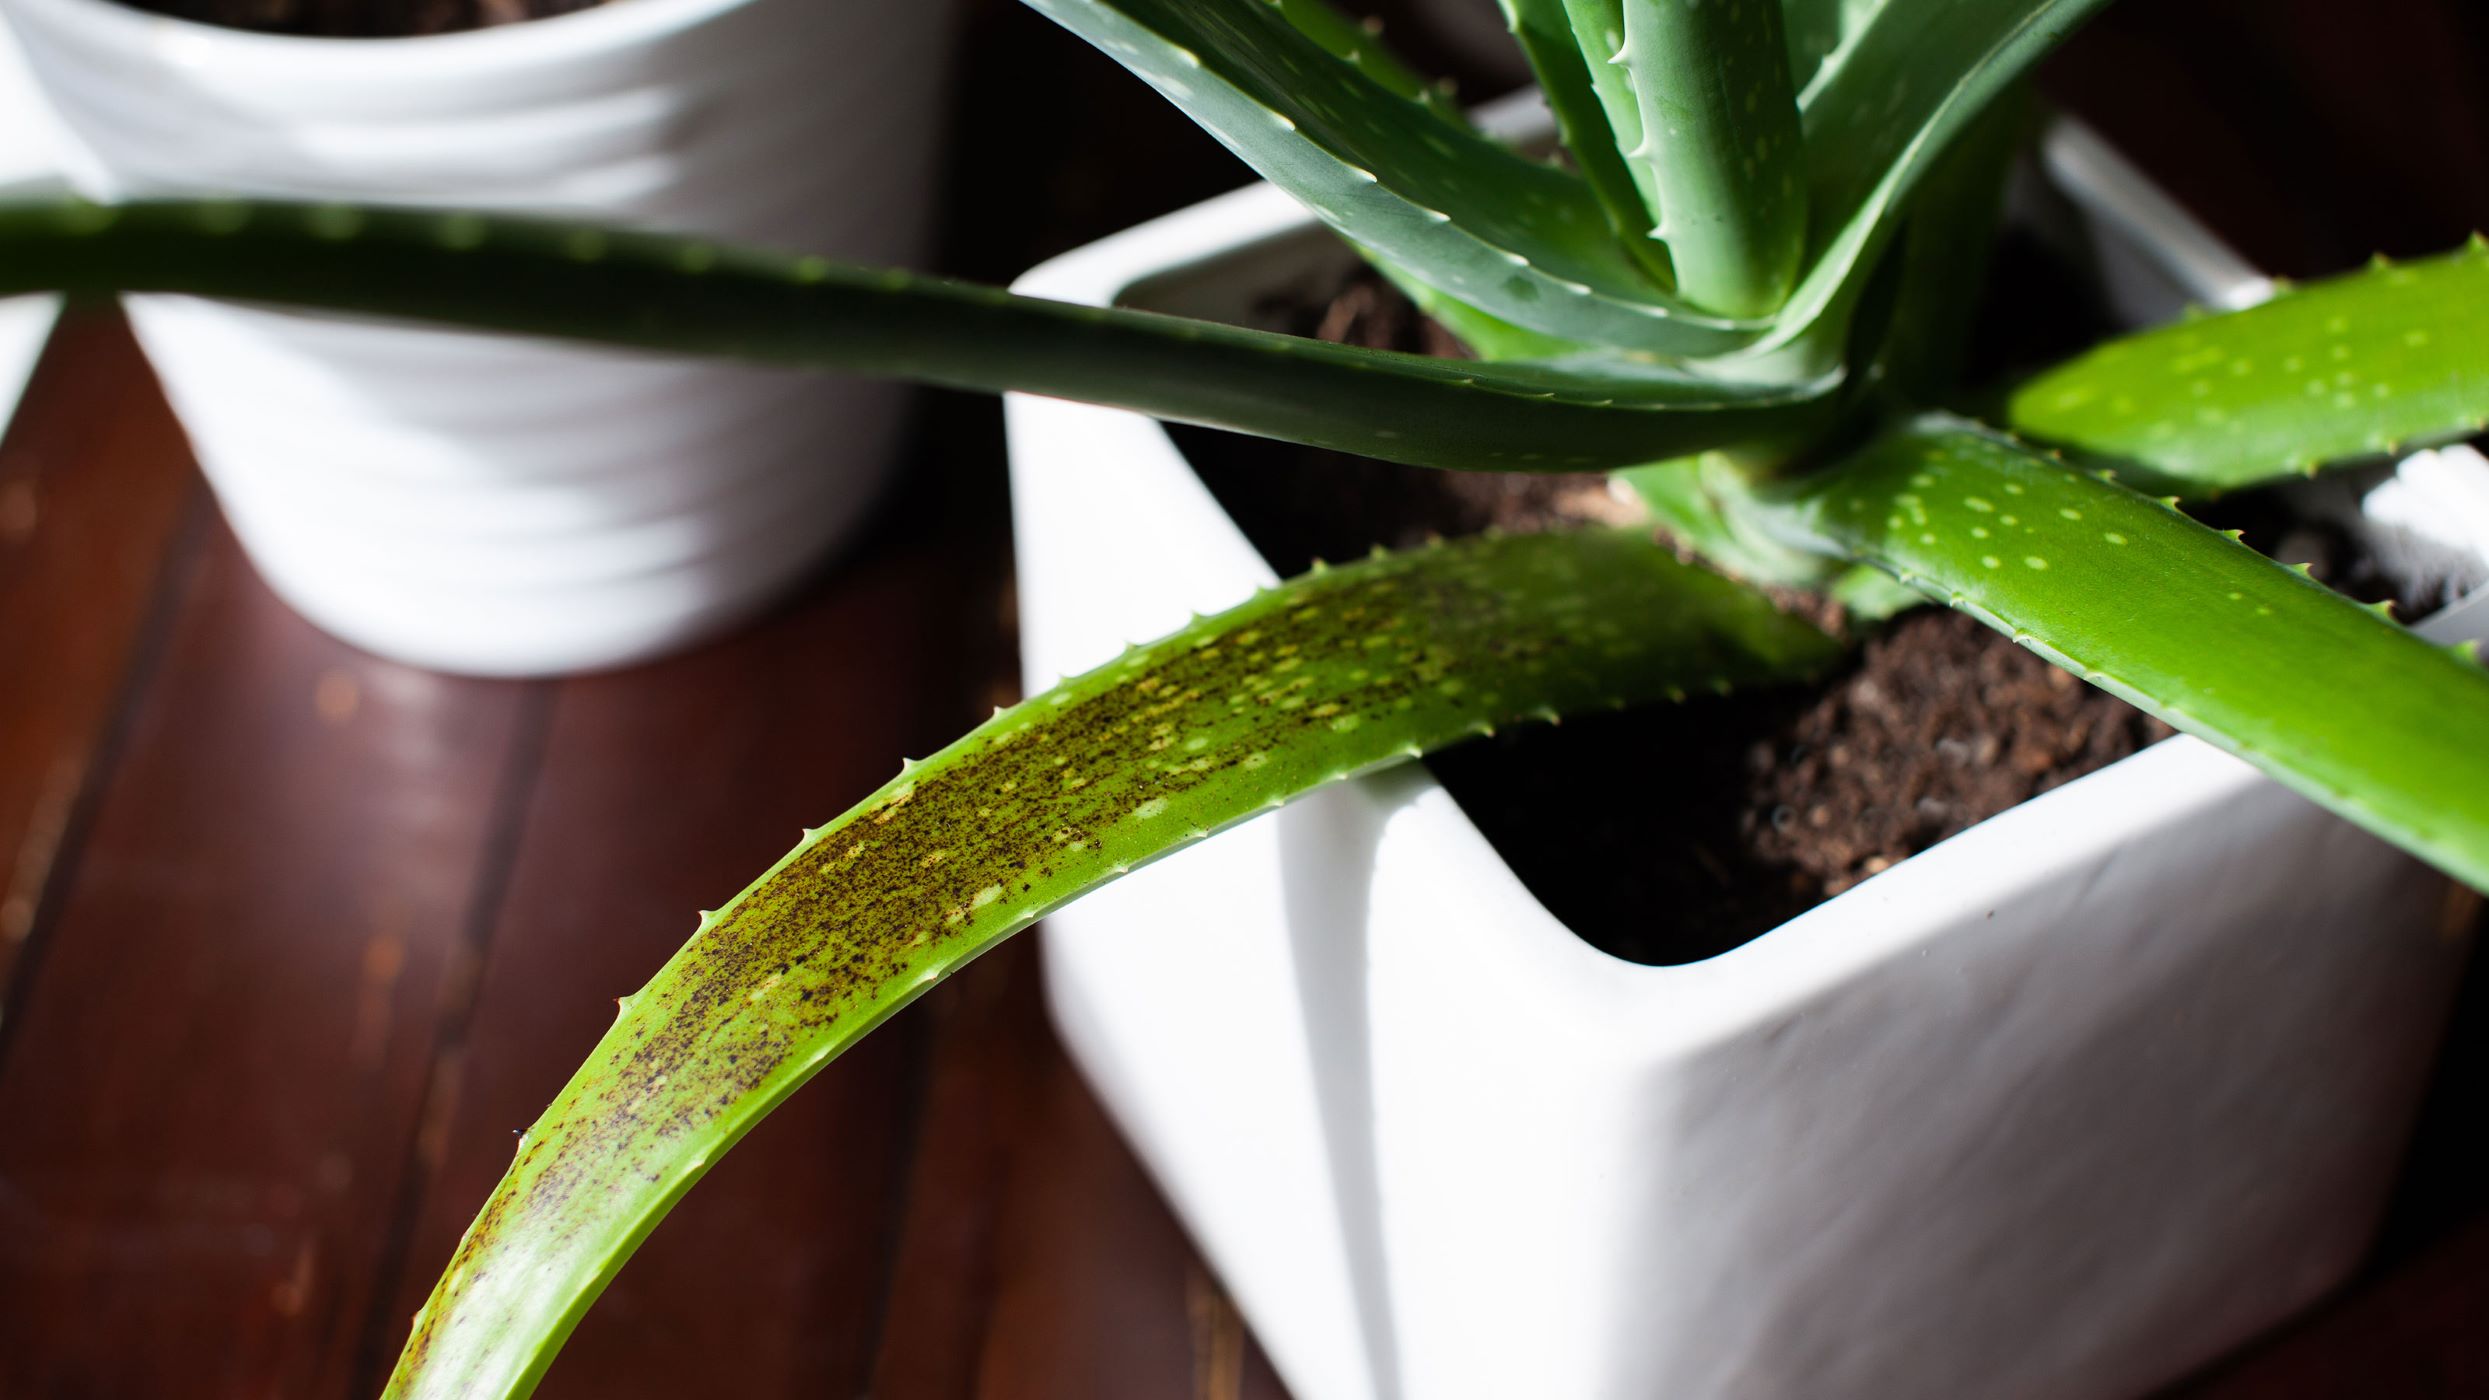 How To Care For Aloe Plant In Pot Without Drainage